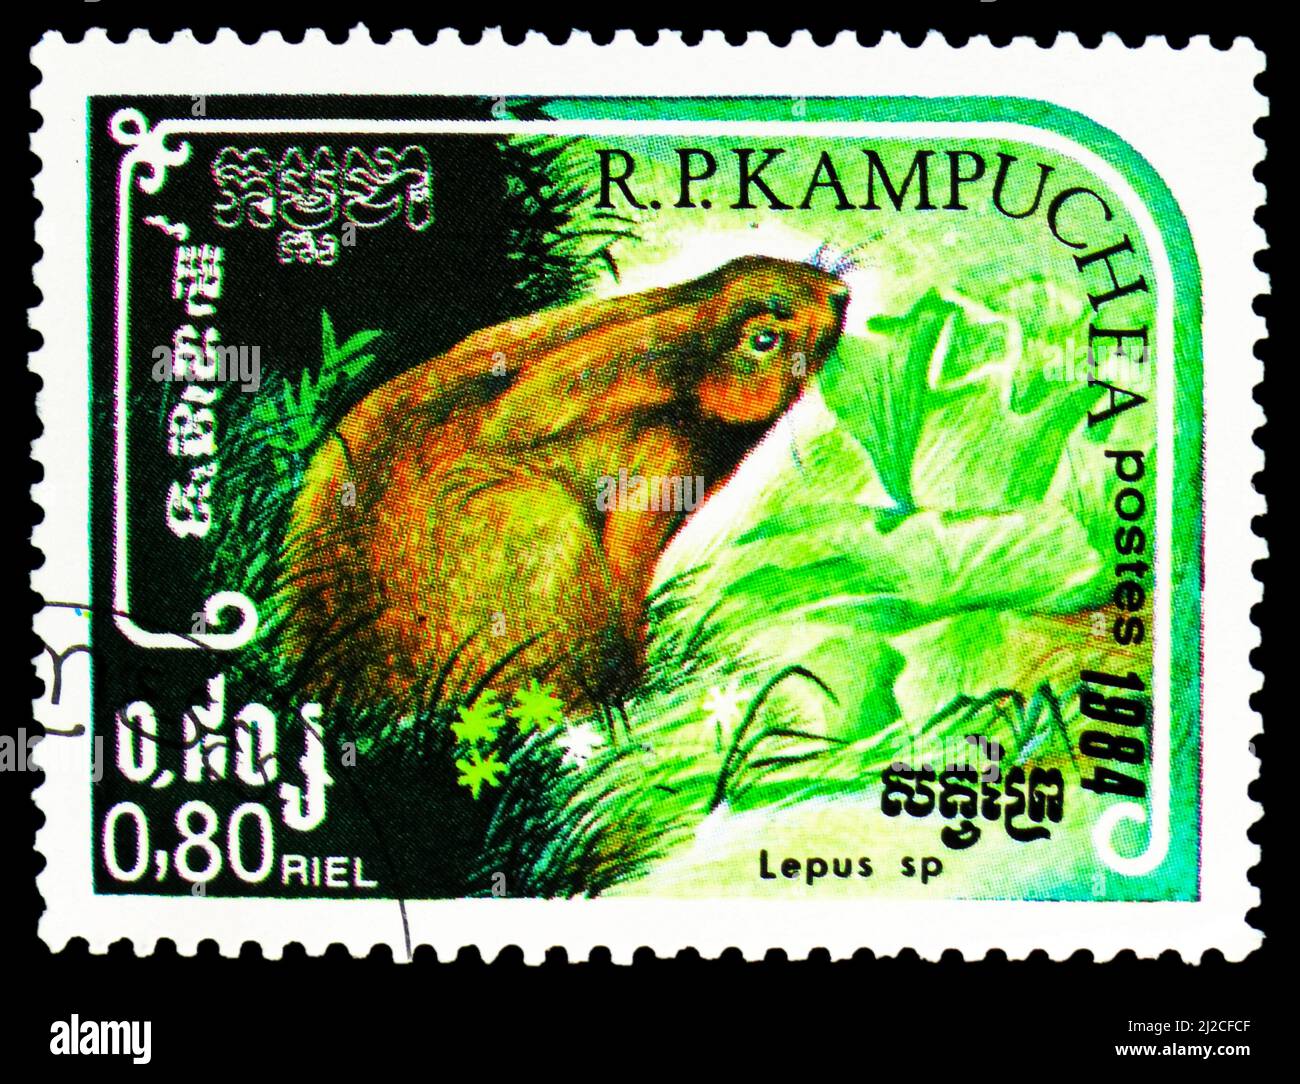 MOSCOW, RUSSIA - MARCH 13, 2022: Postage stamp printed in Kampuchea (Cambodia) shows Hare (Lepus sp.), Wild Animals serie, circa 1984 Stock Photo